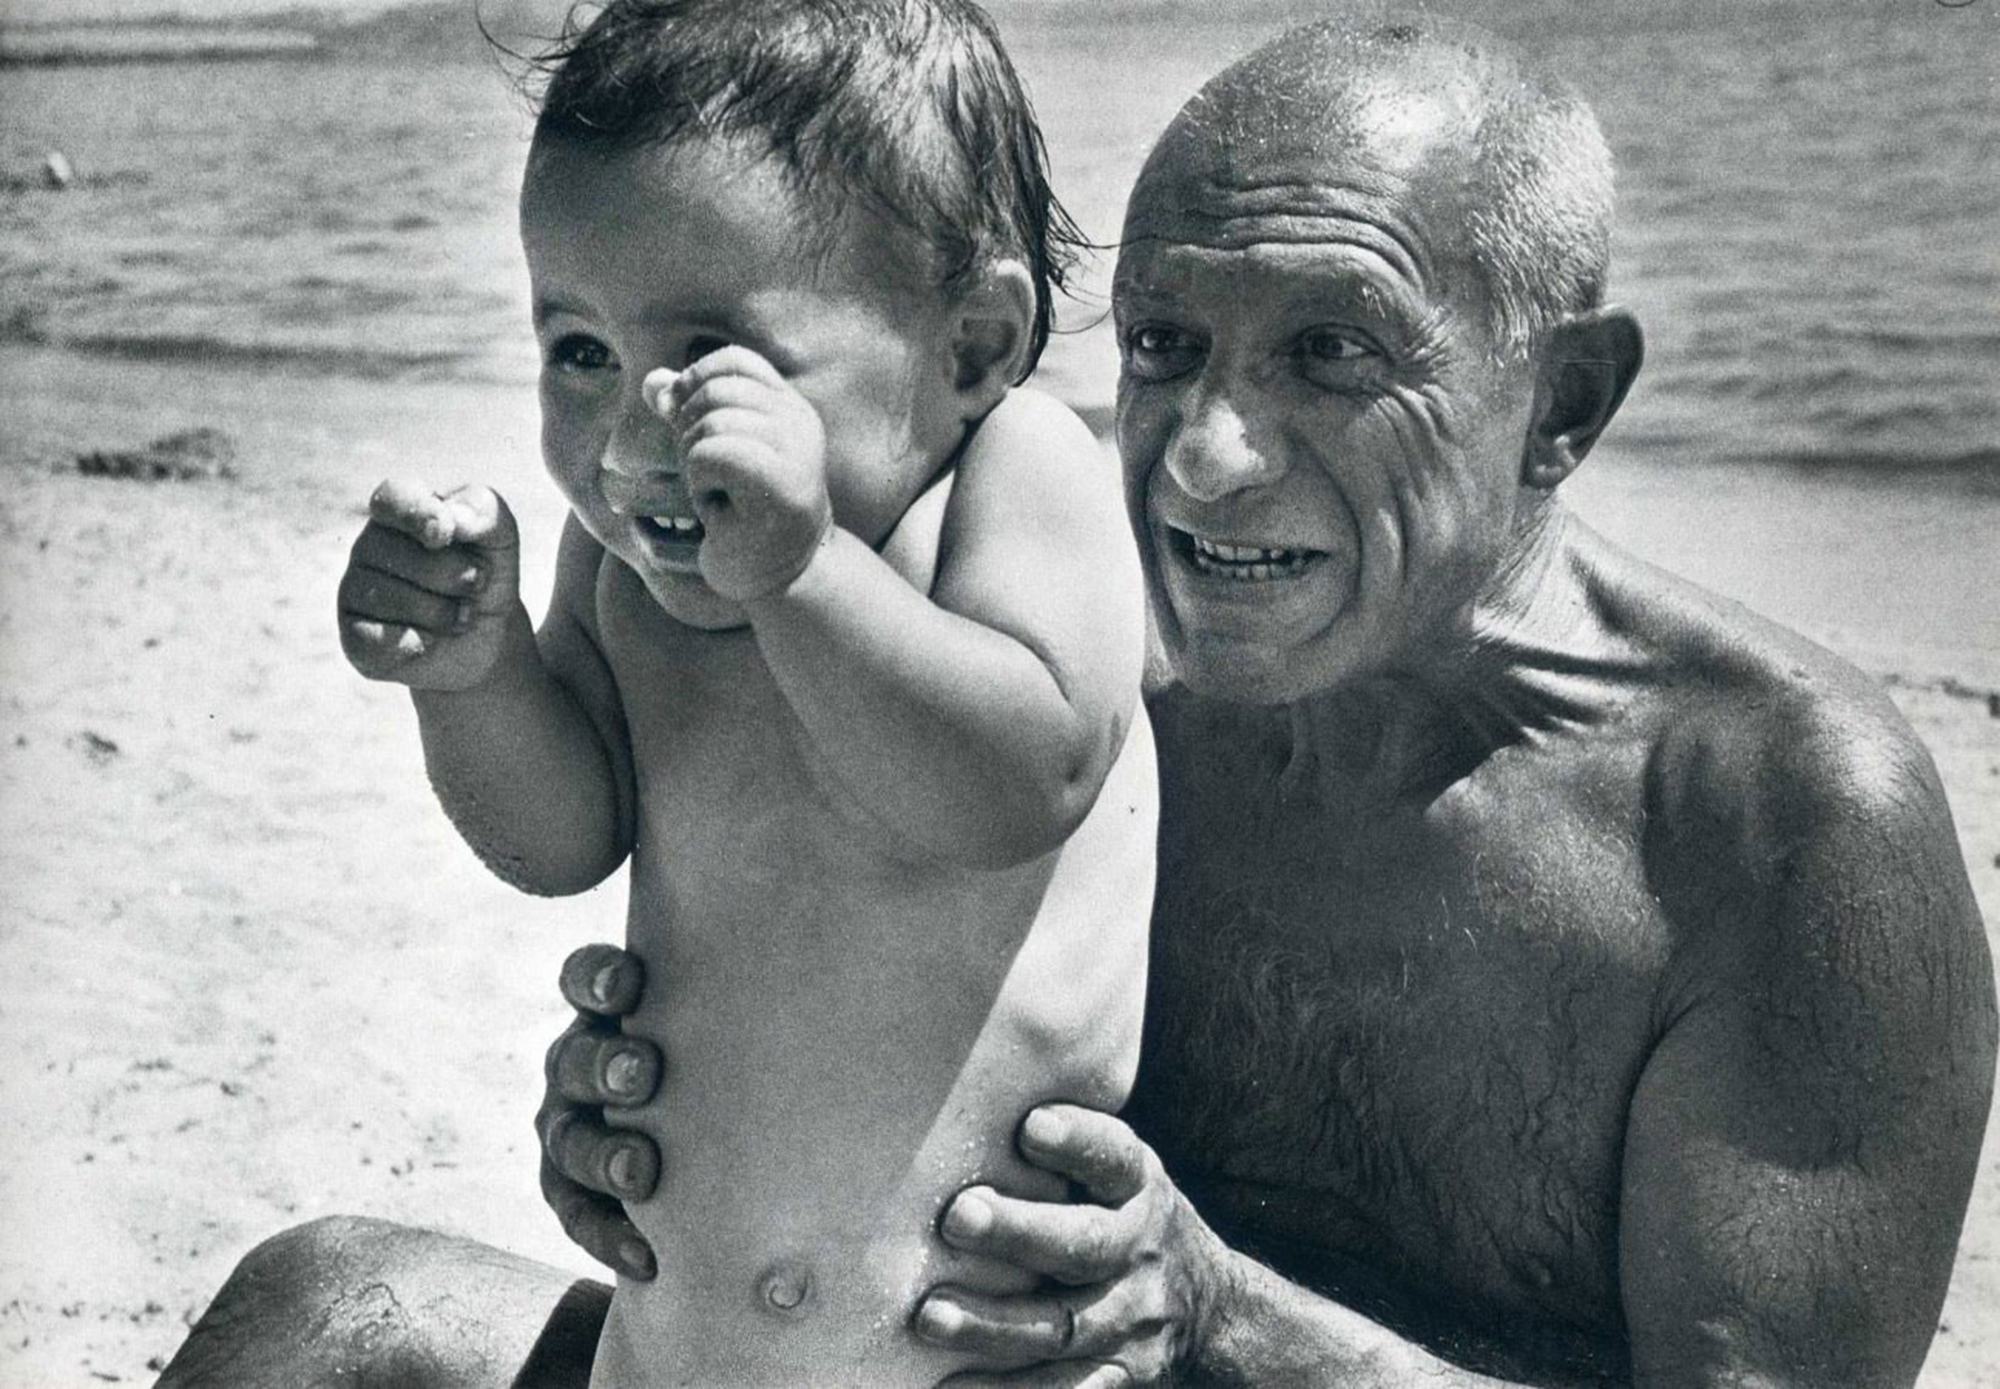 Pablo Picasso playing with his son Claude © Robert Capa 1948 / Magnum Photos | Image source internet